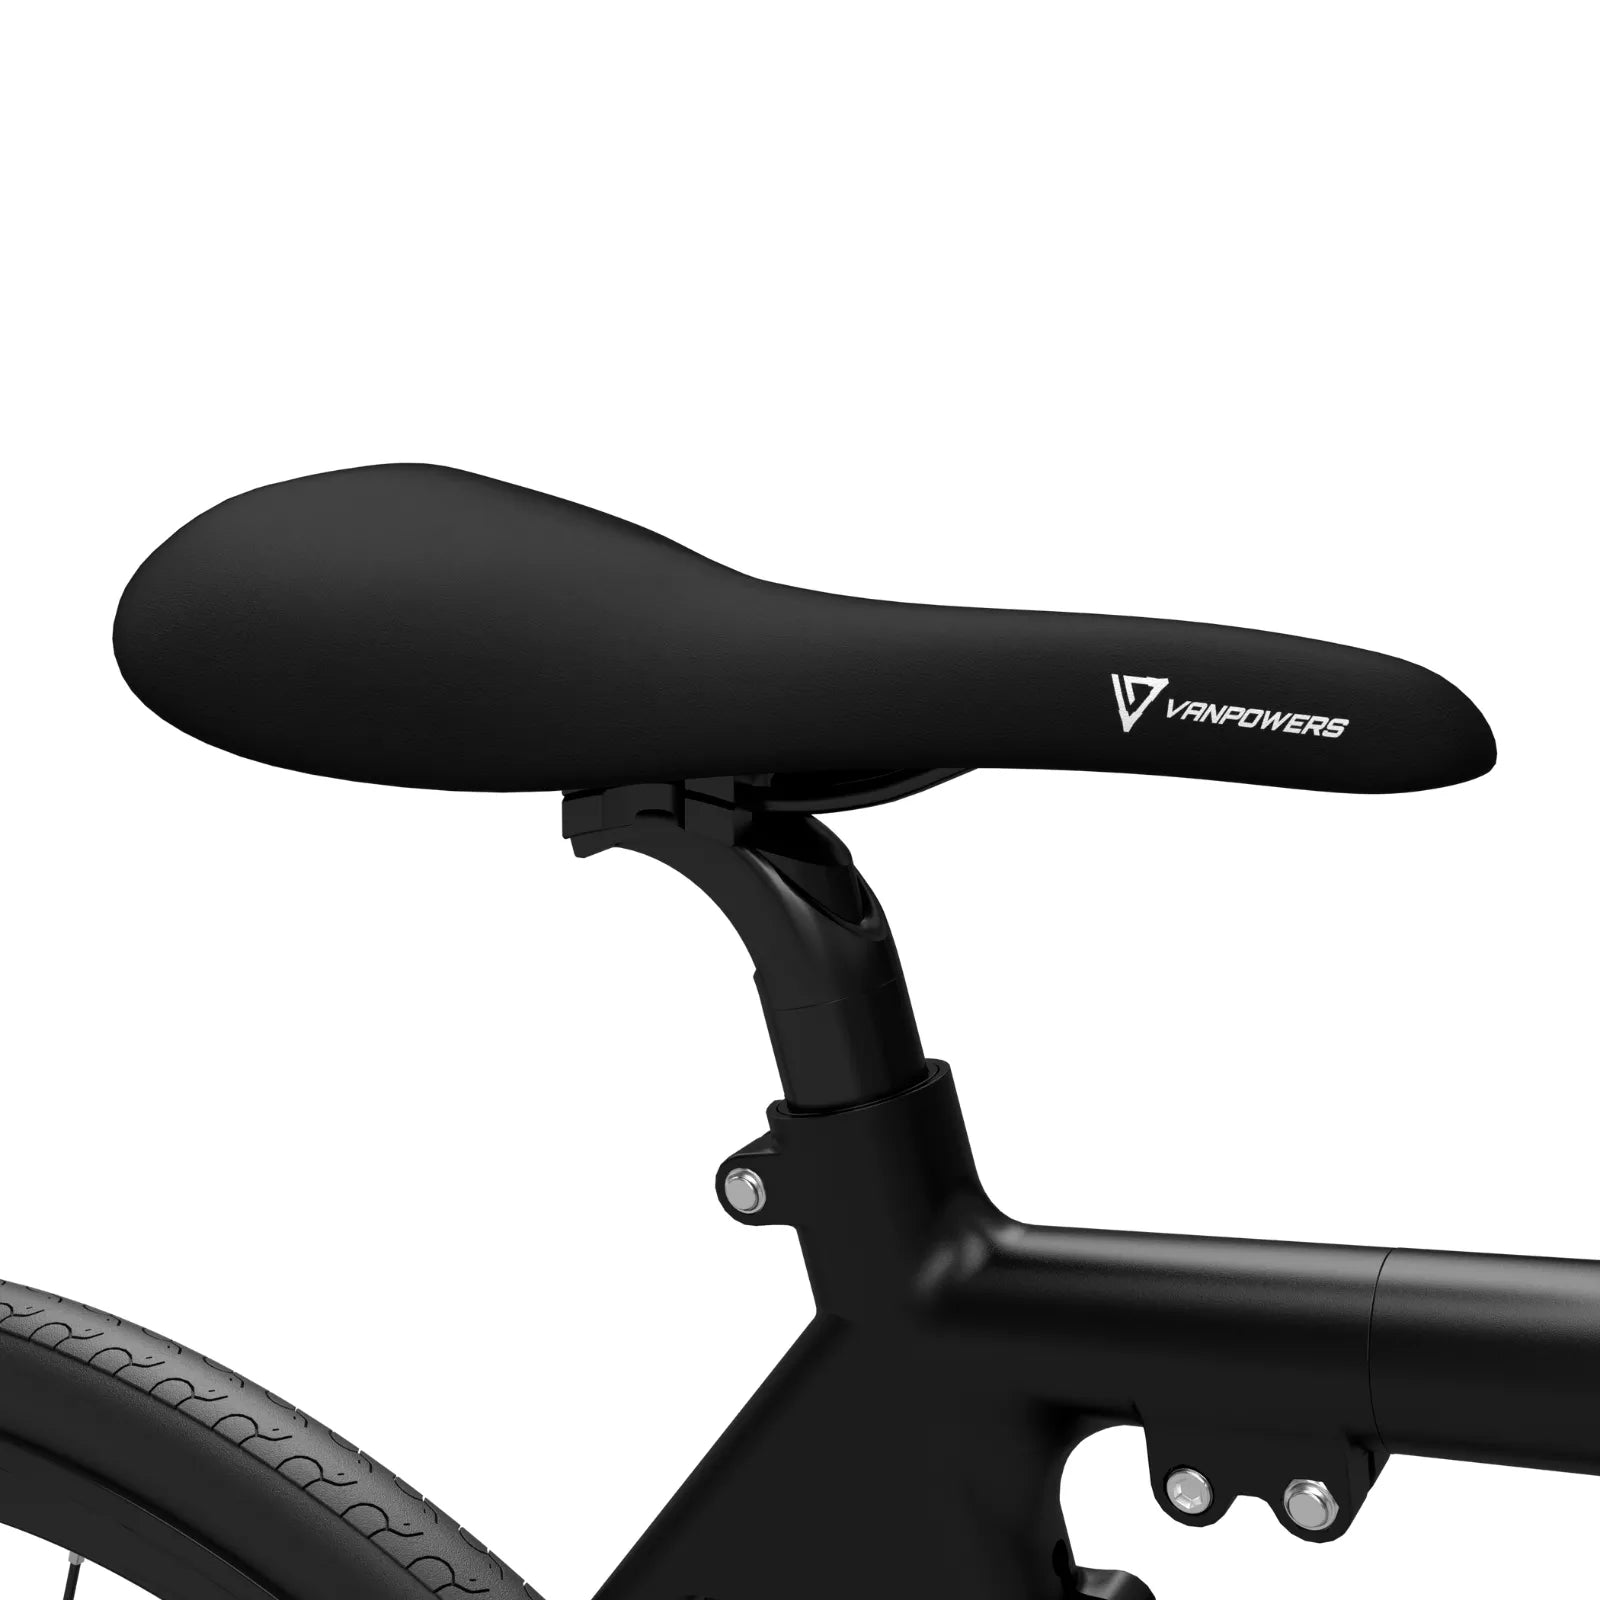 Vanpowers City Vanture/ Commuter ebike Comfort Saddle - Featuring high-quality polyurethane and RoyalGel design, this saddle provides superior comfort by adapting to your body and ensuring a more uniform weight distribution.